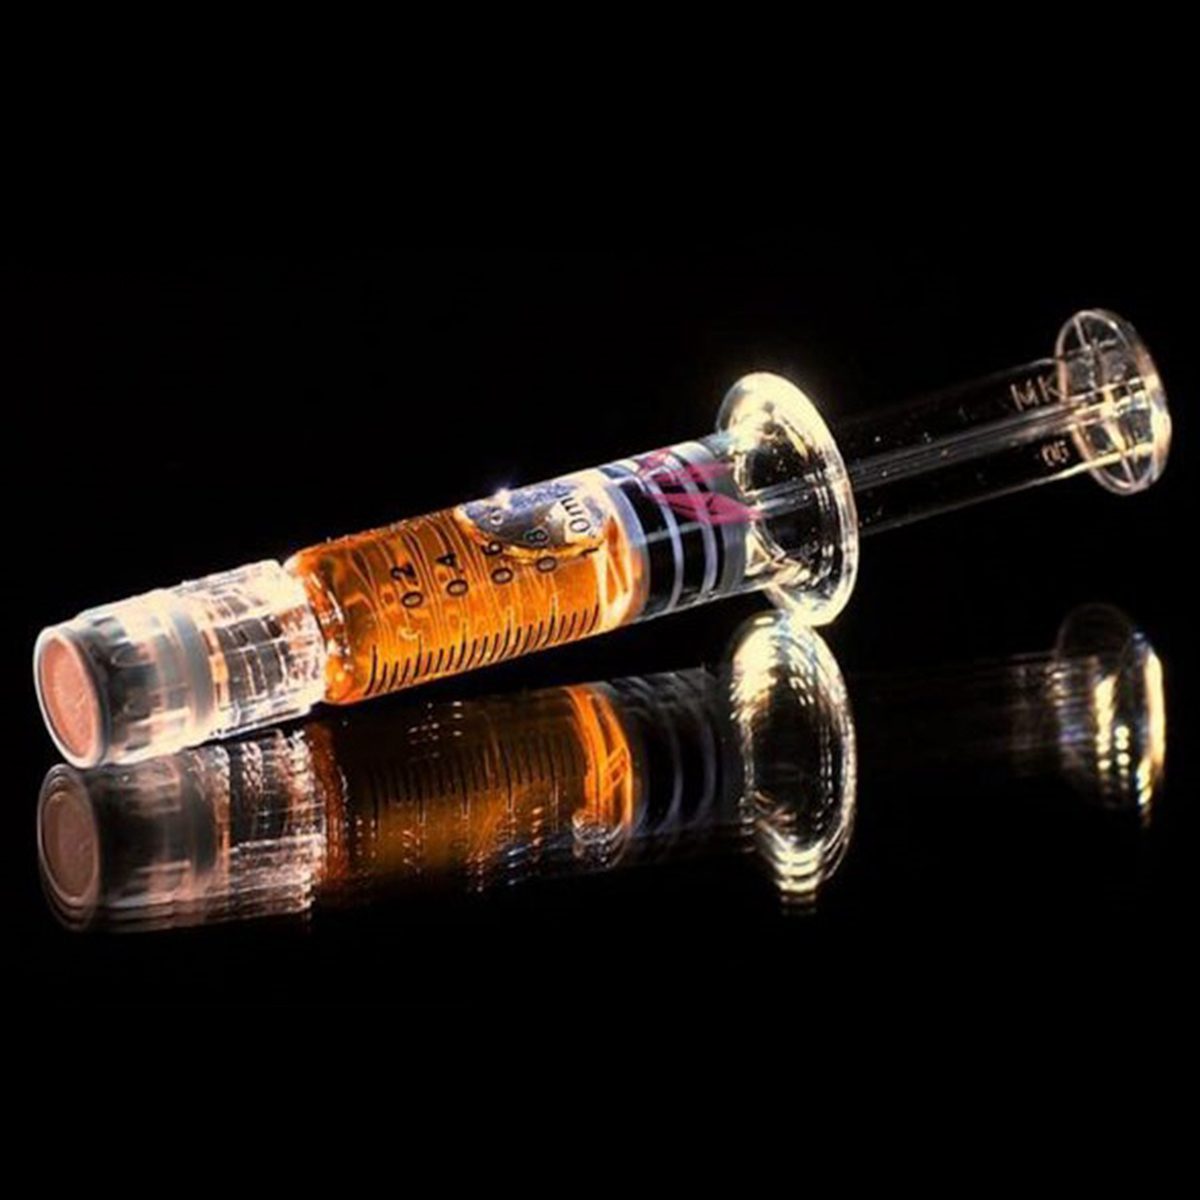 Distillate Syringes 1G By Notorious